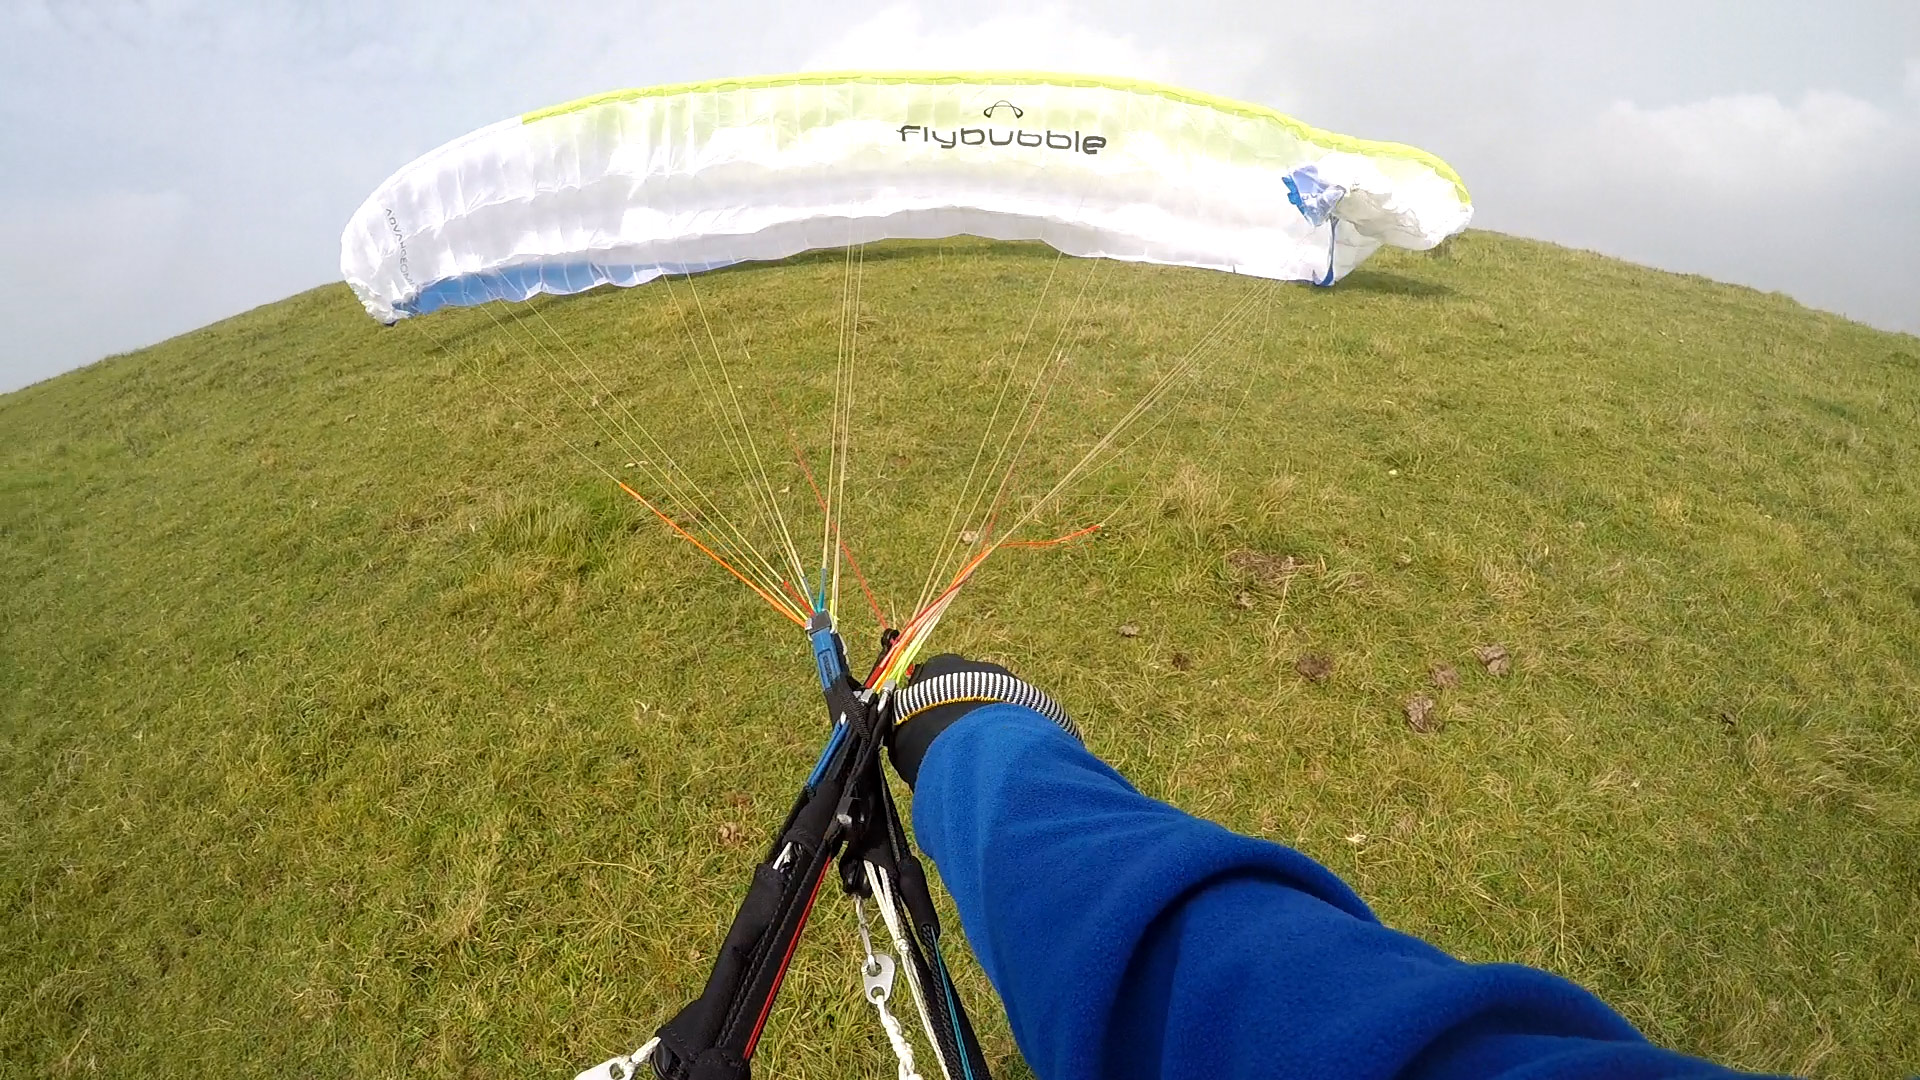 How to fix a cravatte on a paraglider: launch practice